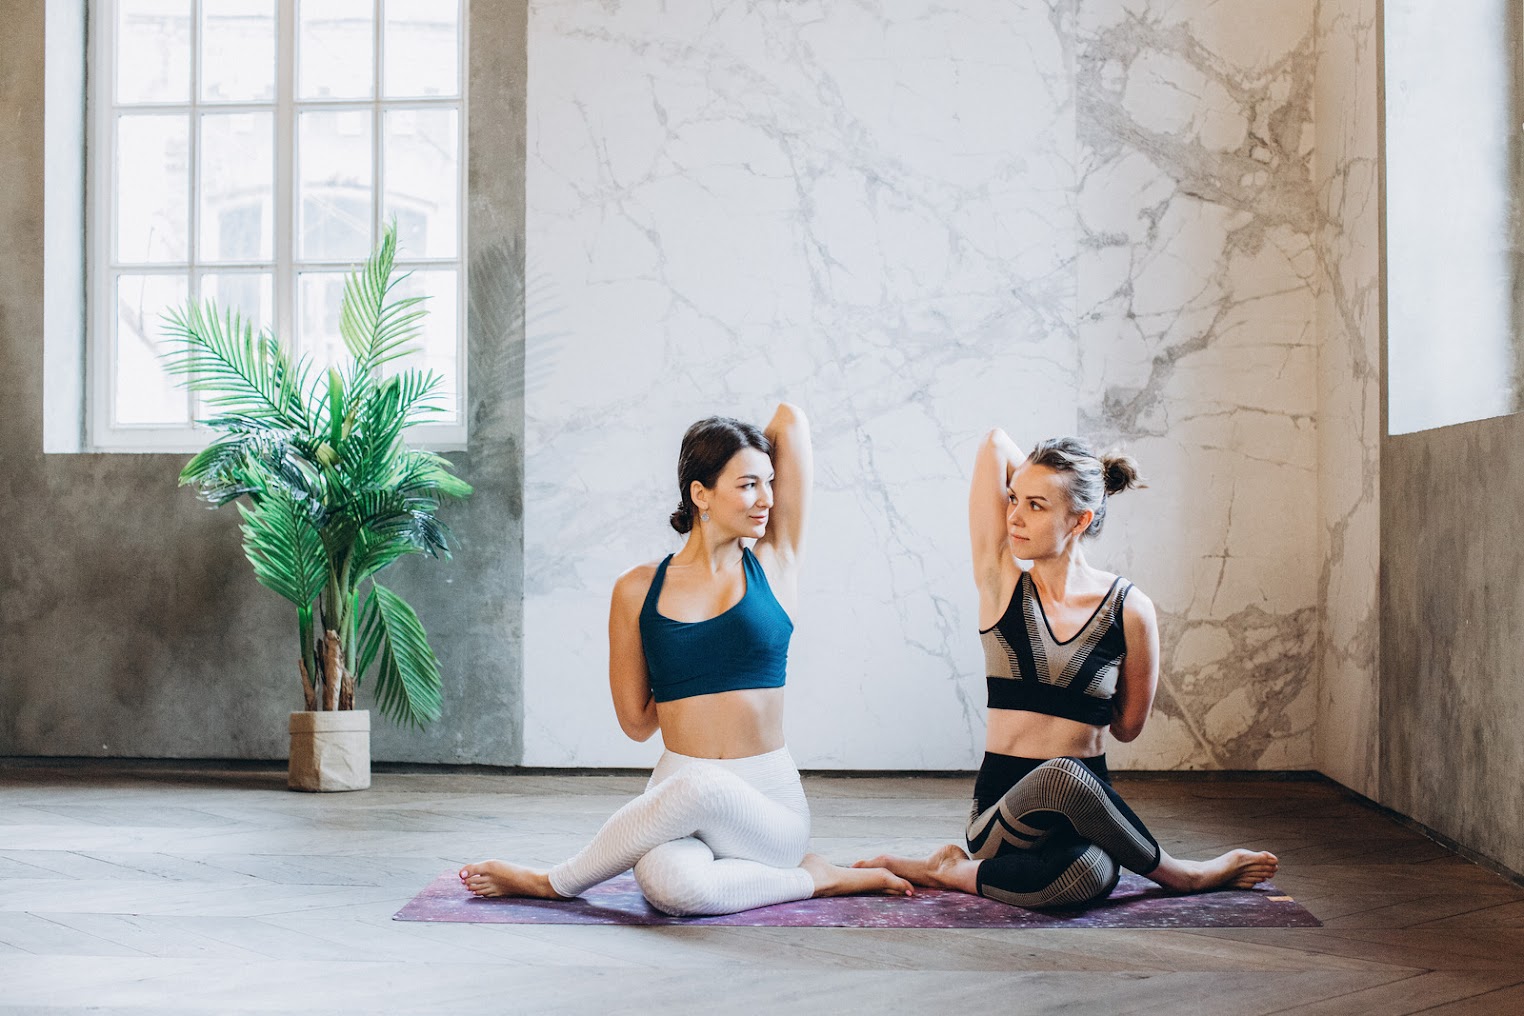 Two women in a Yoga pose facing each other